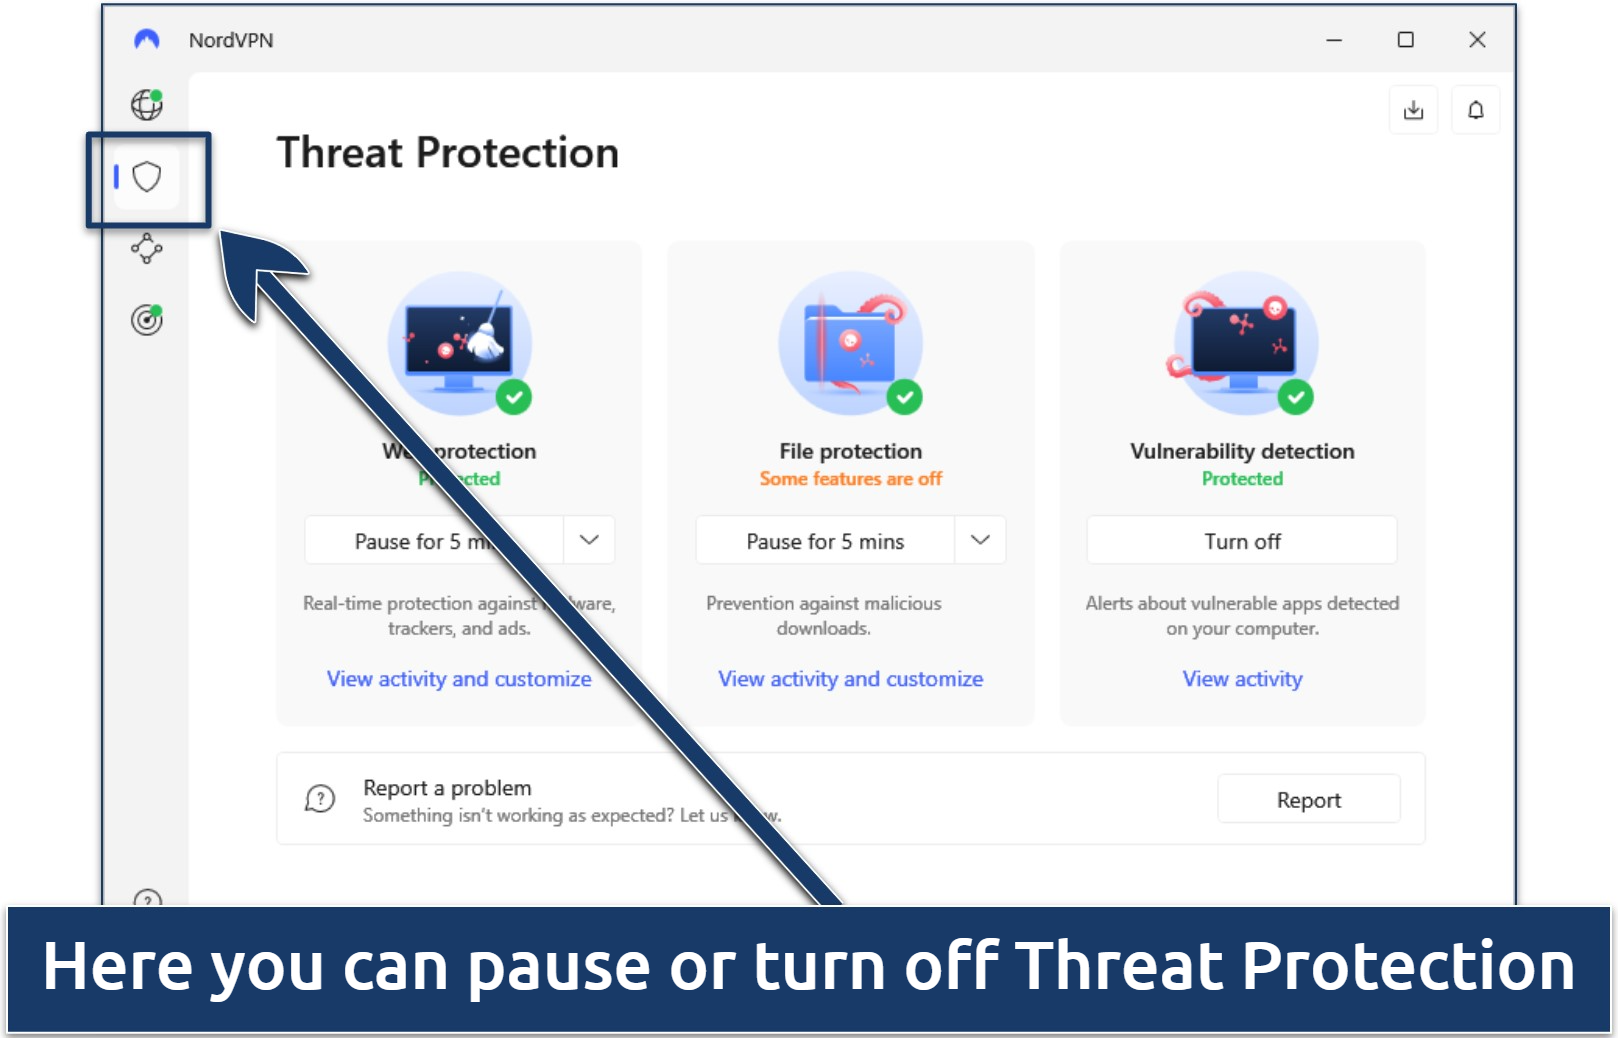 Screenshot of NordVPN Windows interface with instructions on how to turn off Threat Protection